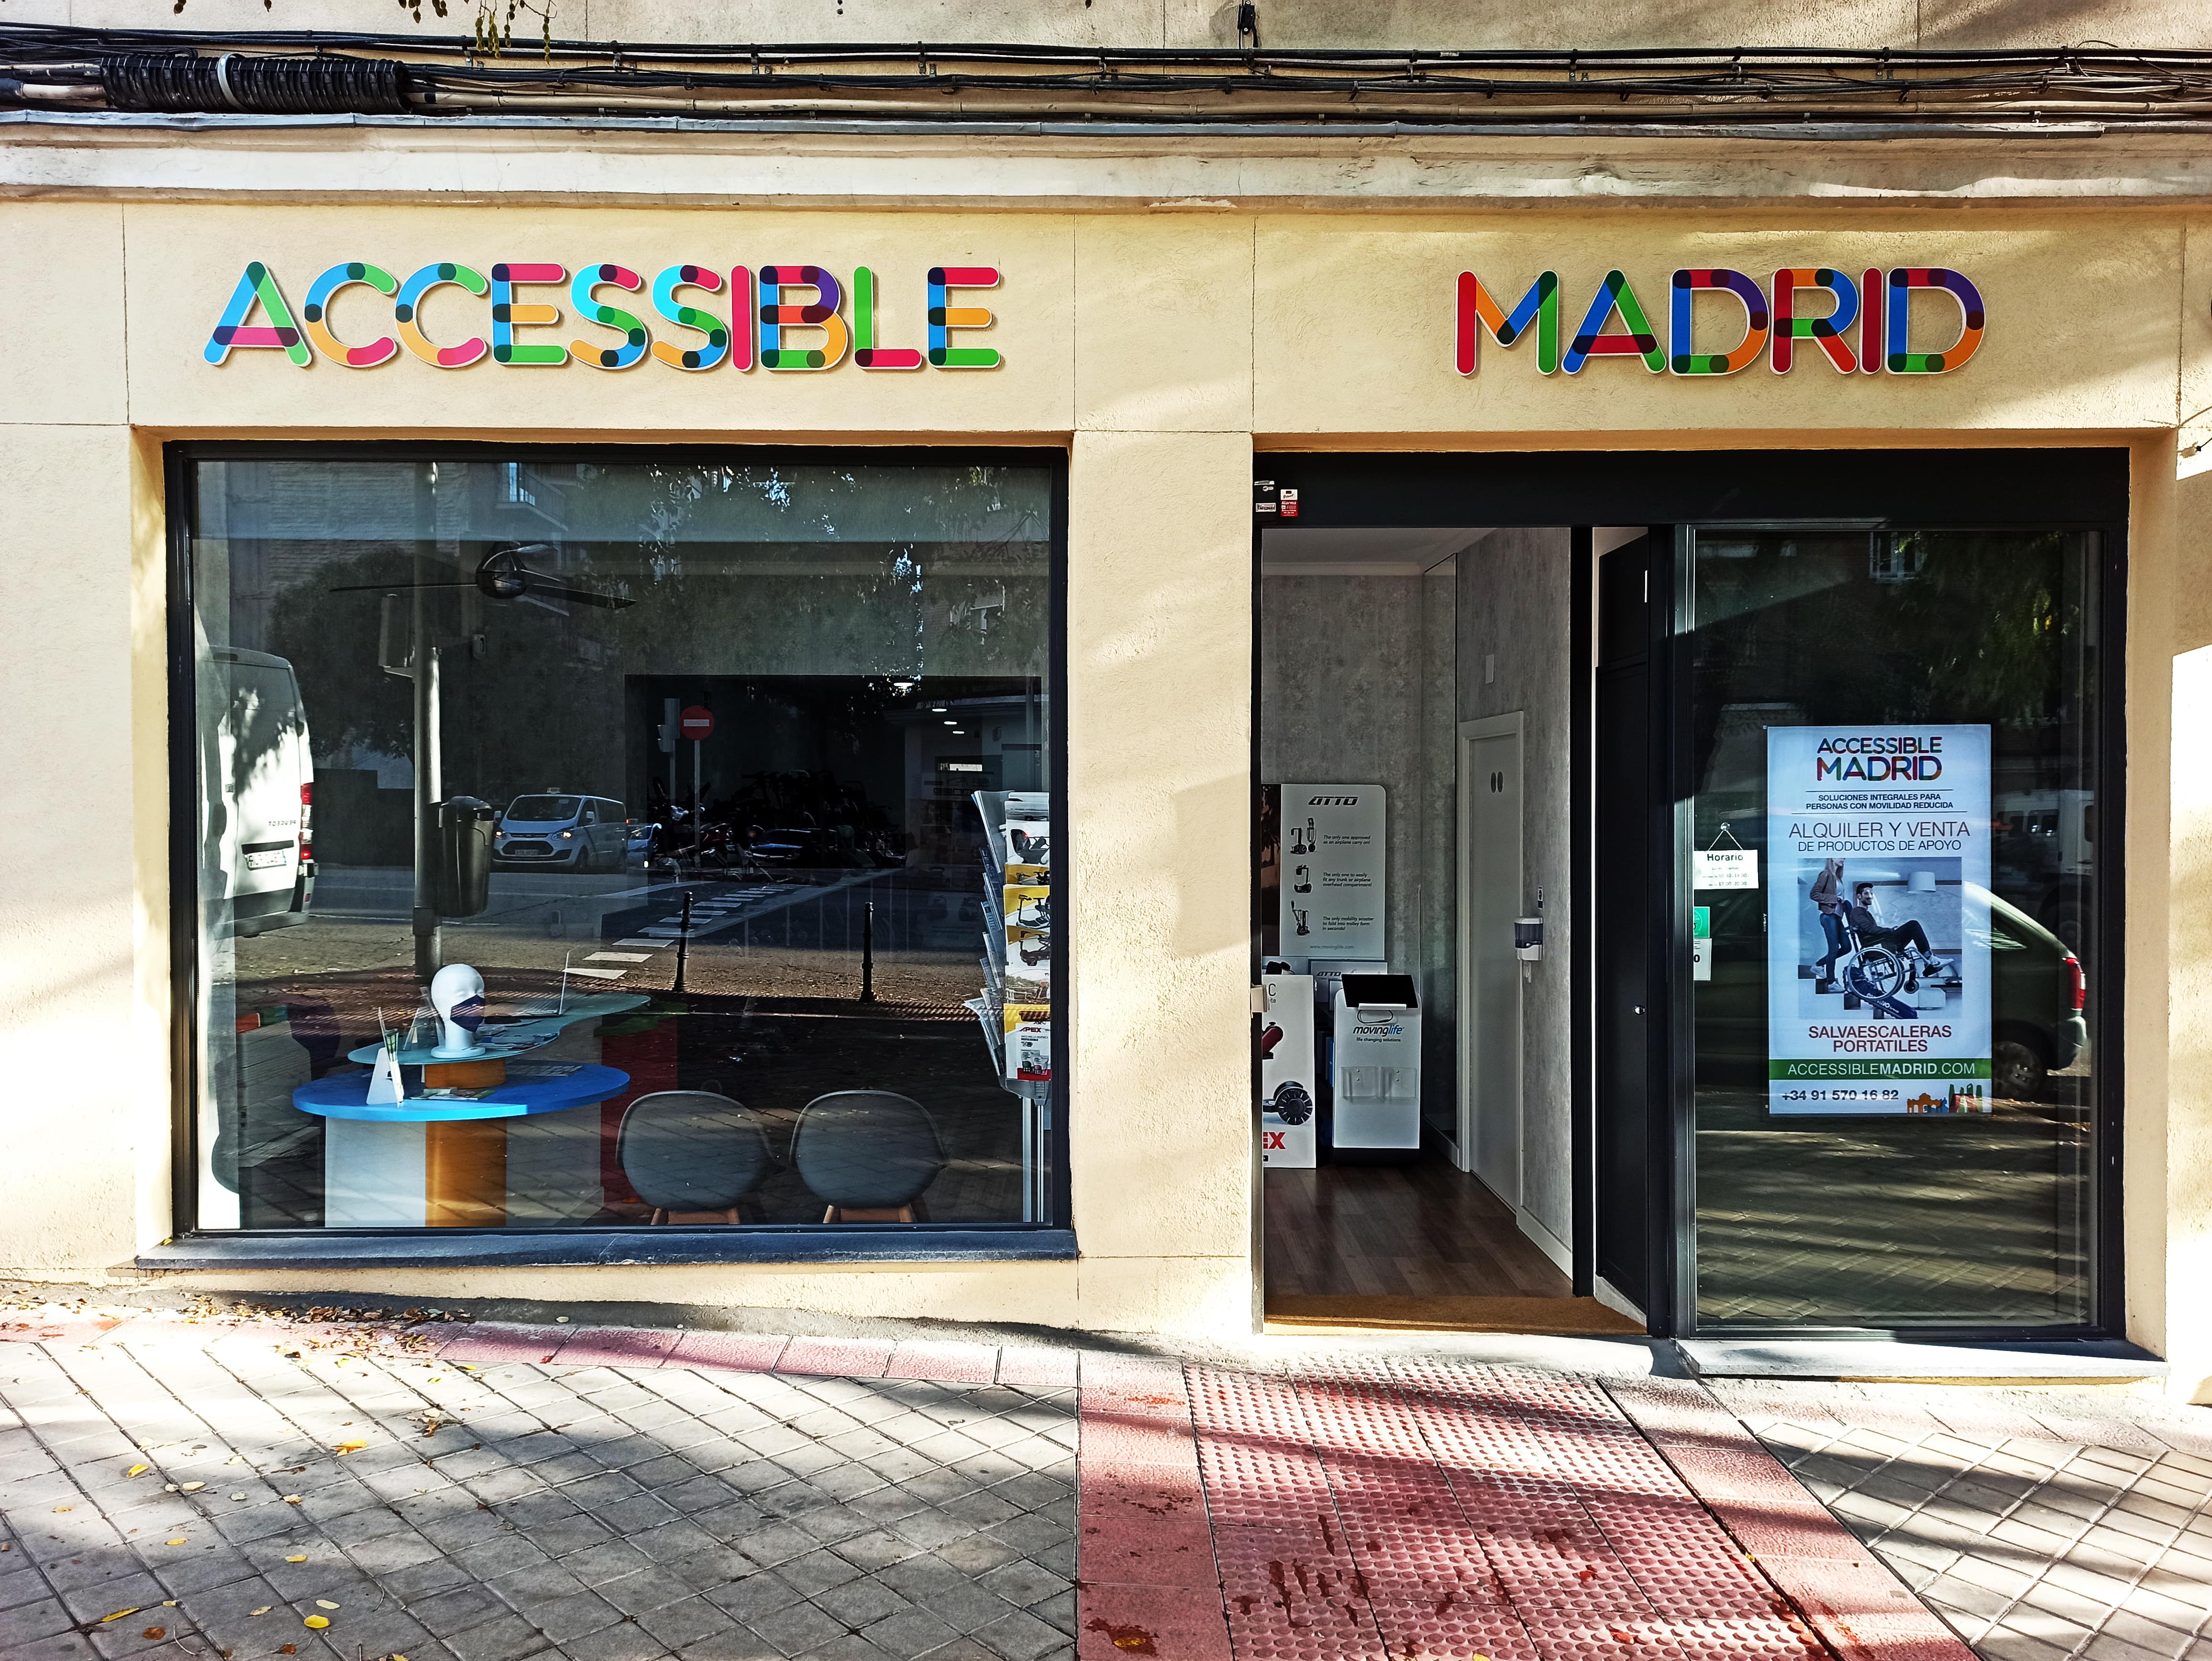 Facade of the Accessible Madrid store